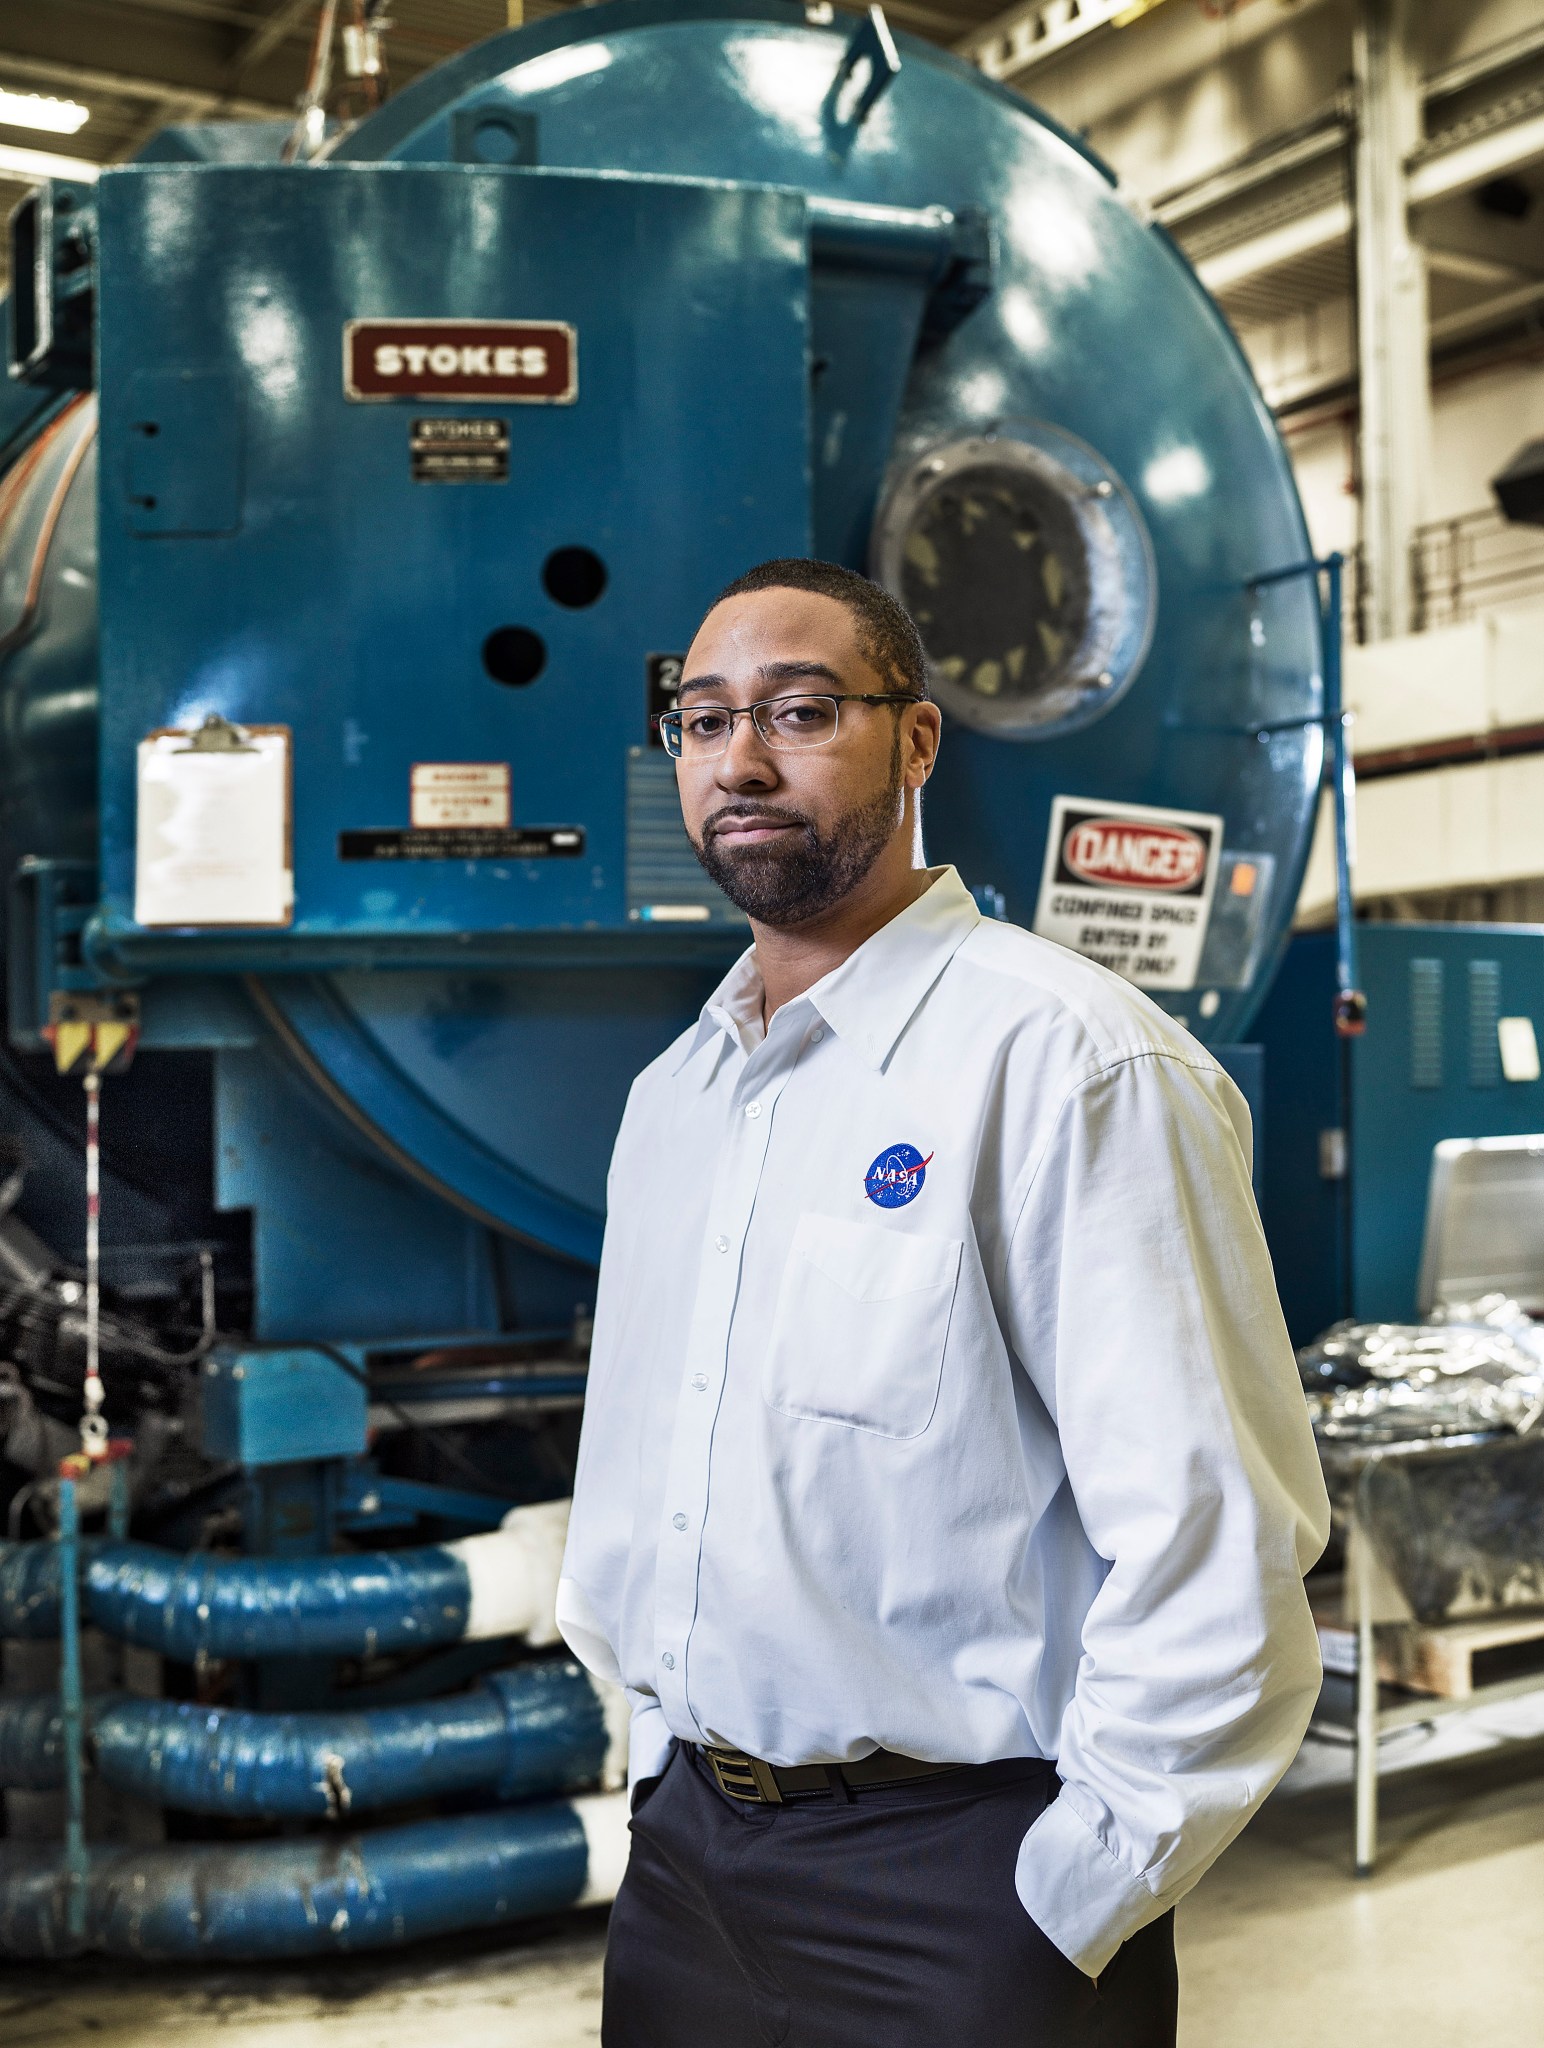 A Black man with short black hair, wearing glasses, a white dress shirt with a NASA logo, and navy dress pants stands in front of a large blue machine in the environmental testing facility at NASA Goddard.   